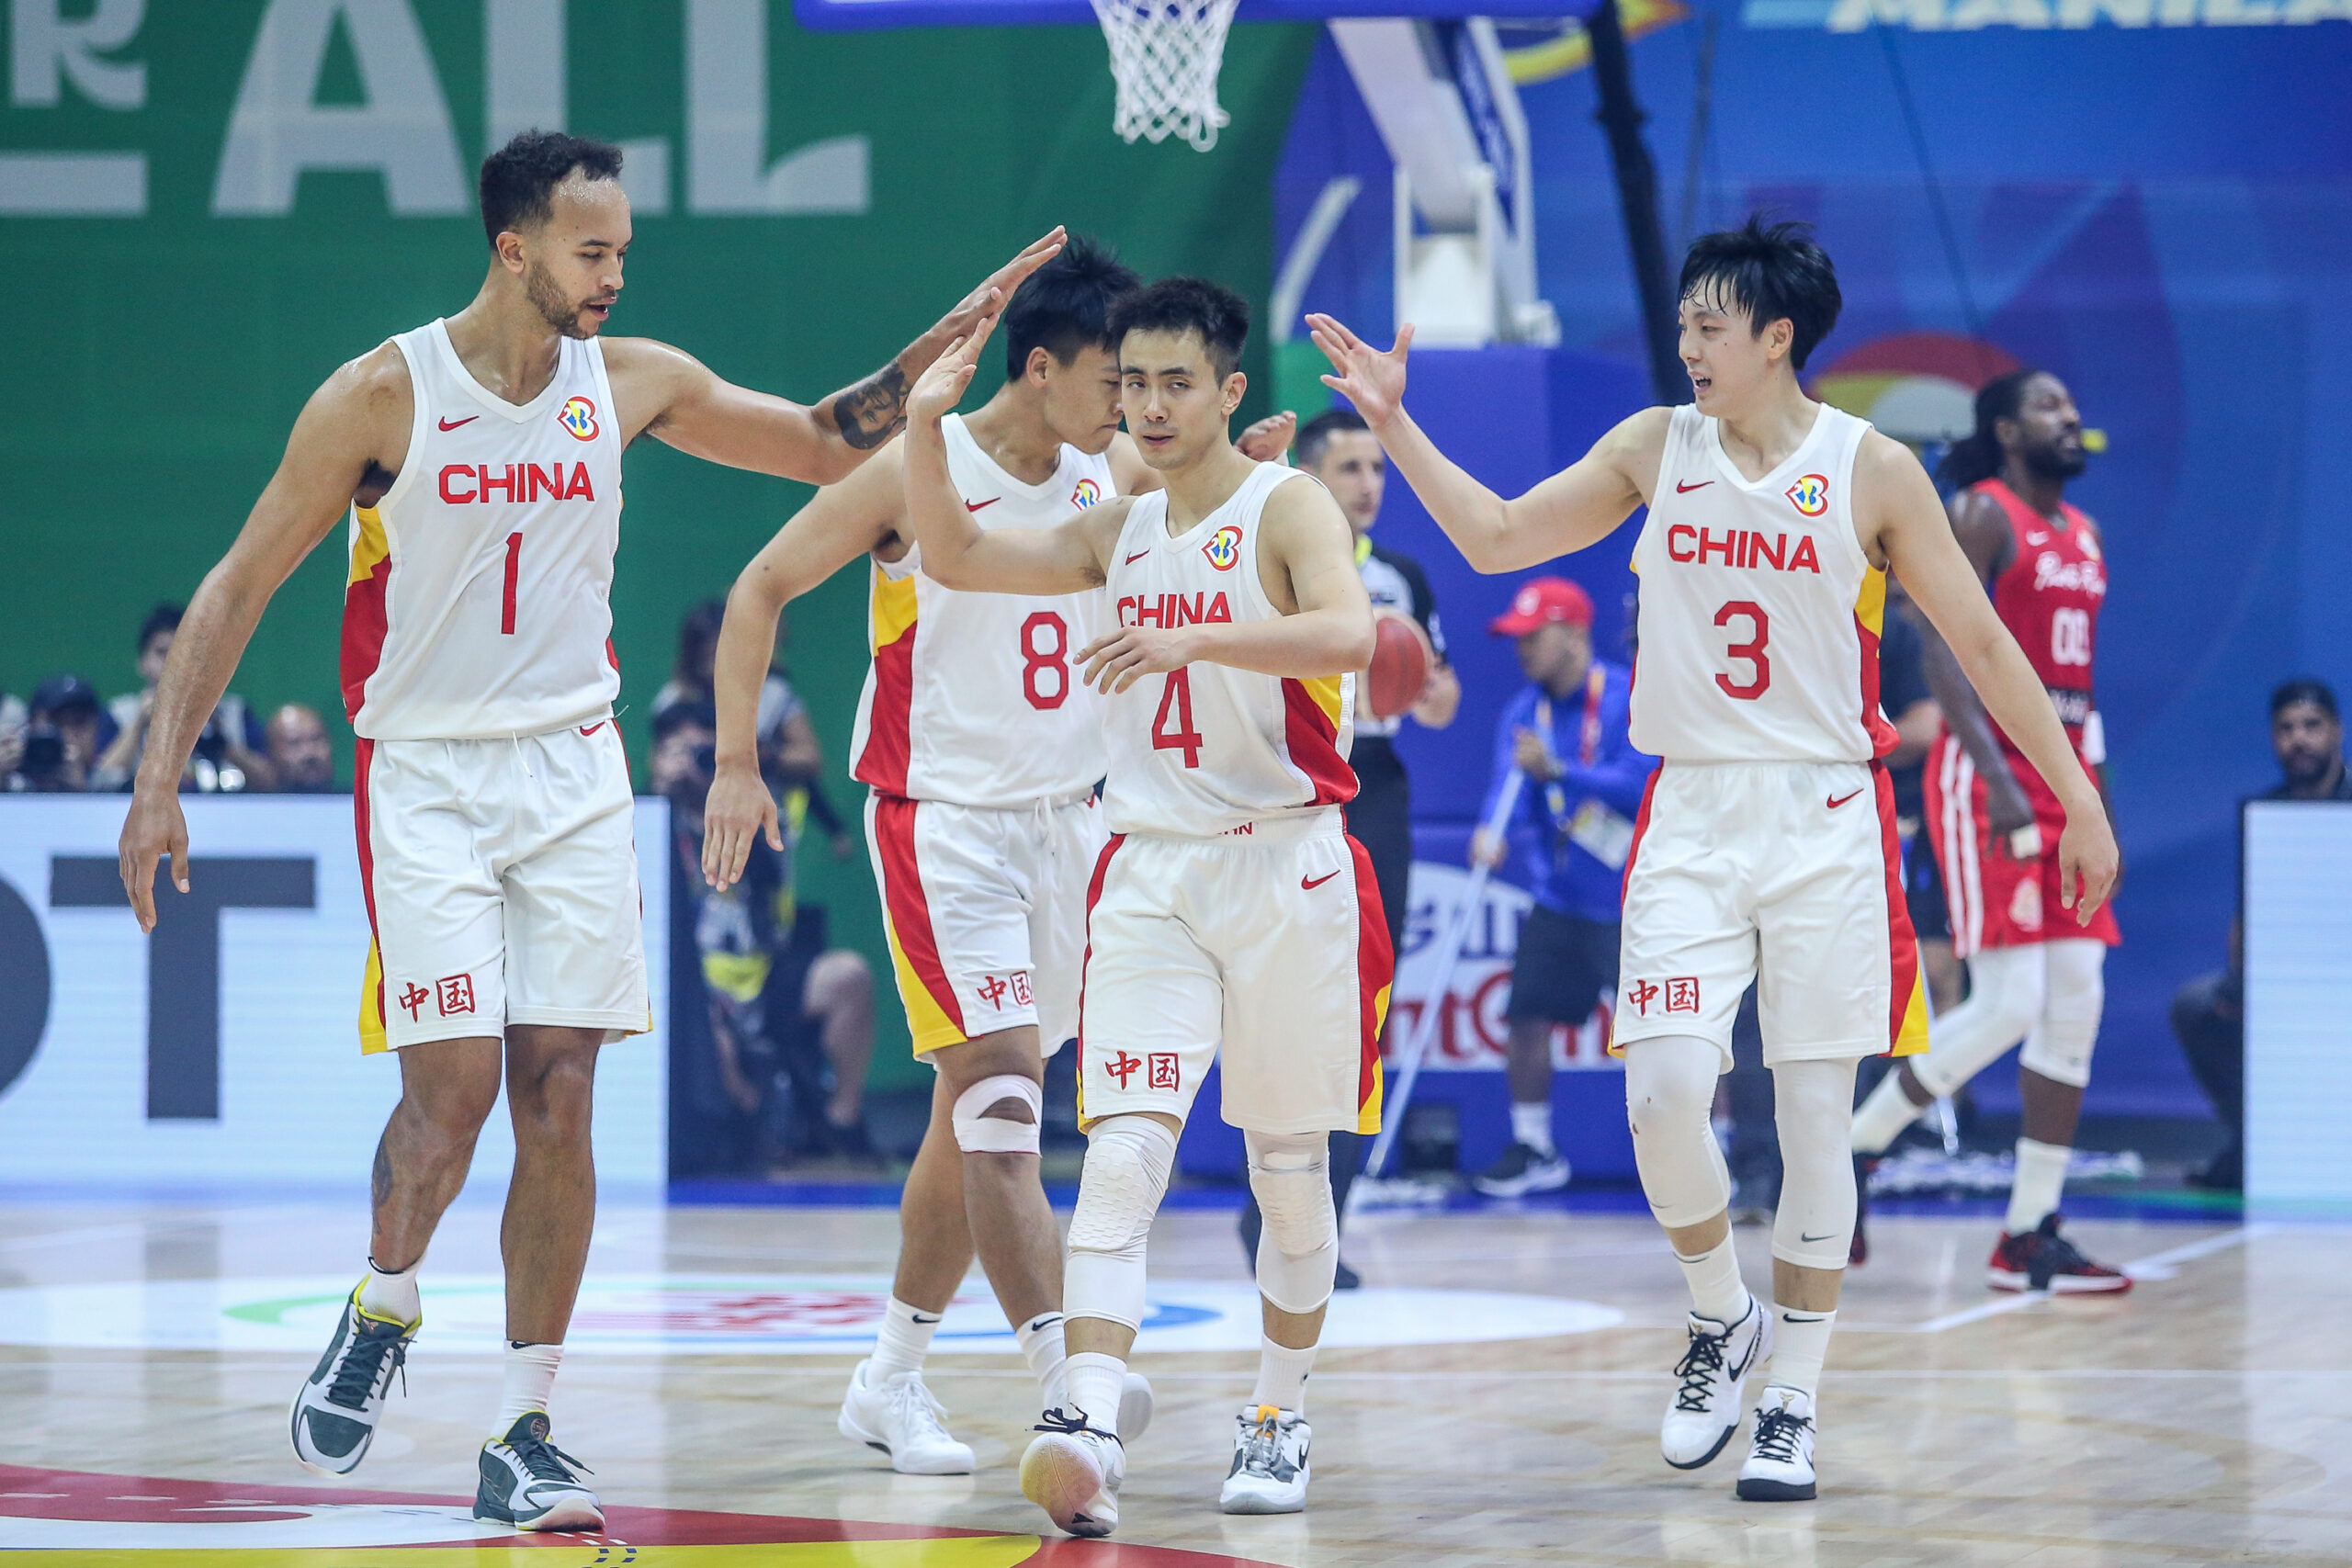 A form of pain: China basketball fans pile in after latest loss